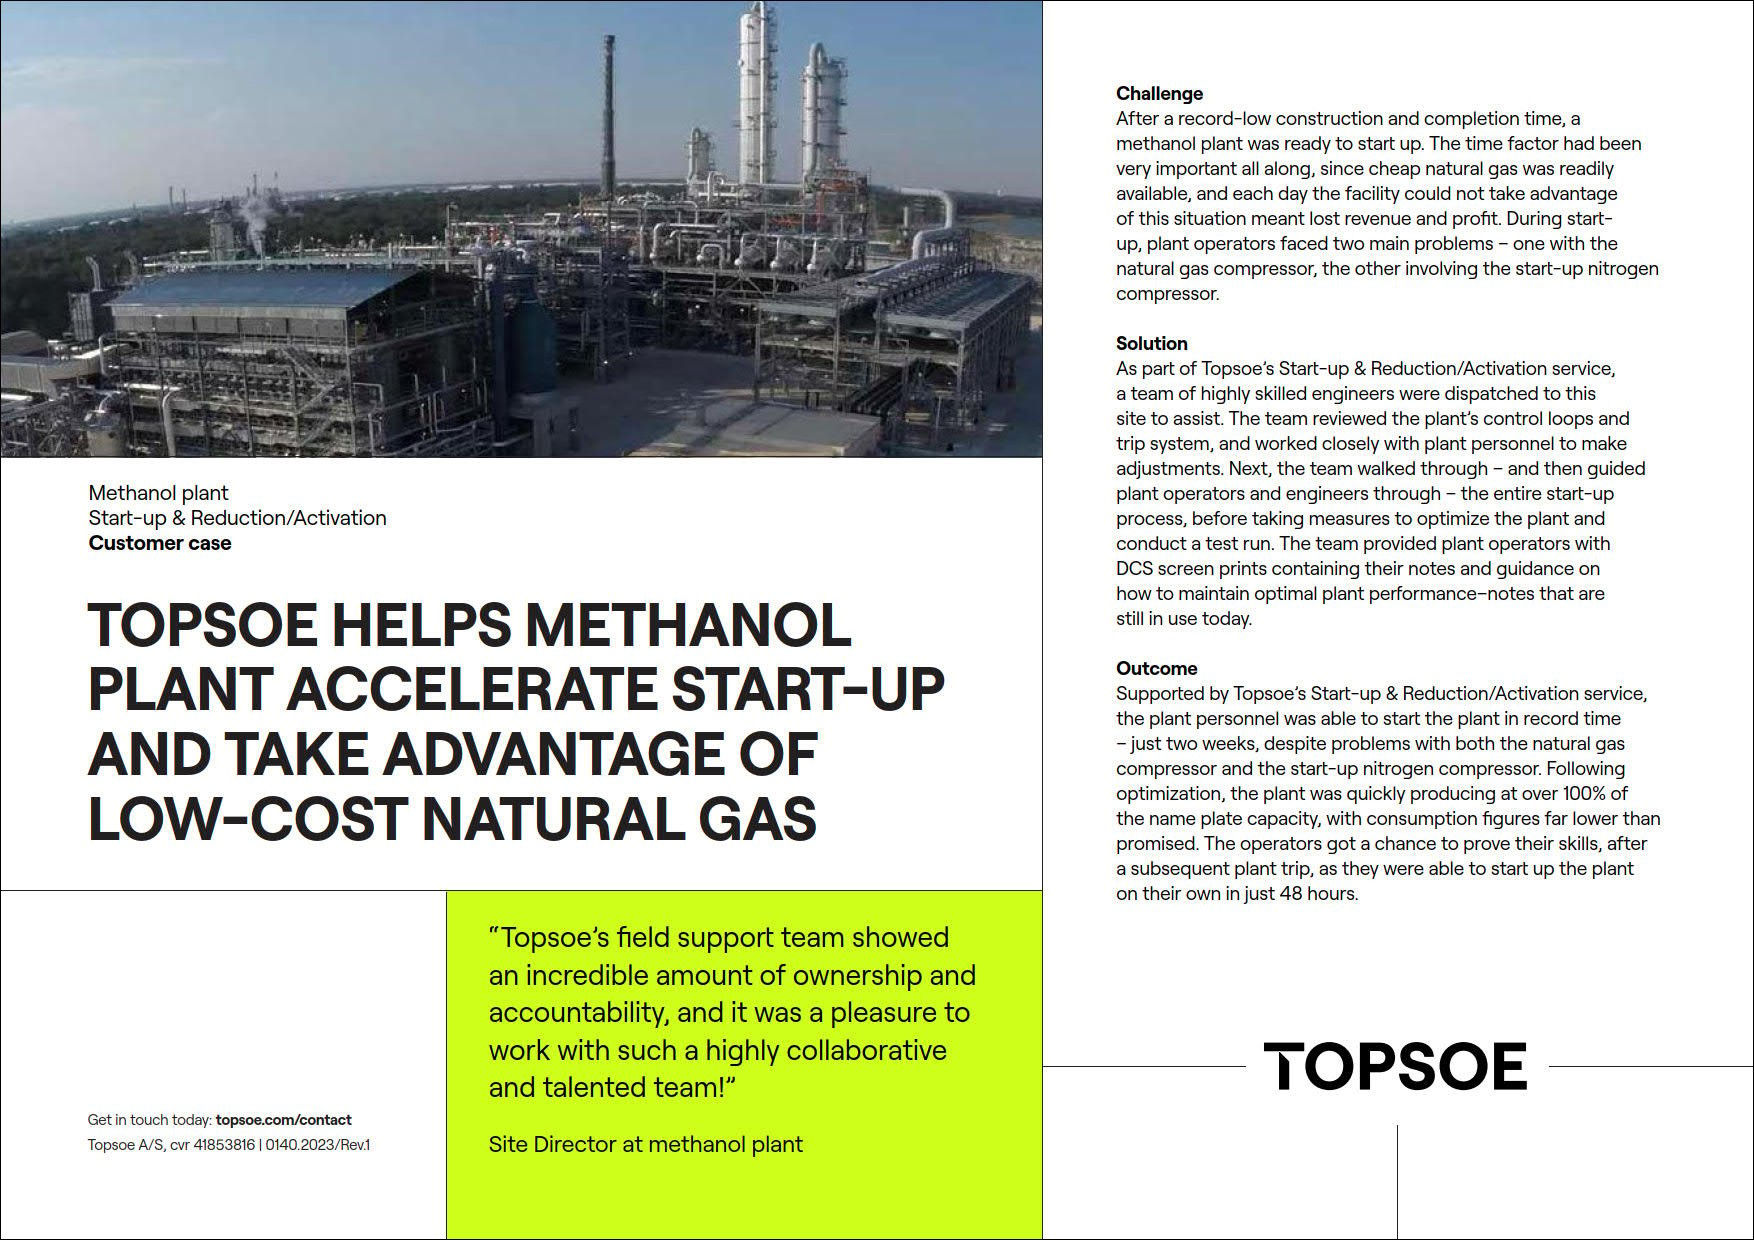 Topsoe helps methanol plant accelerate start-up and take advantage of low-cost natural gas